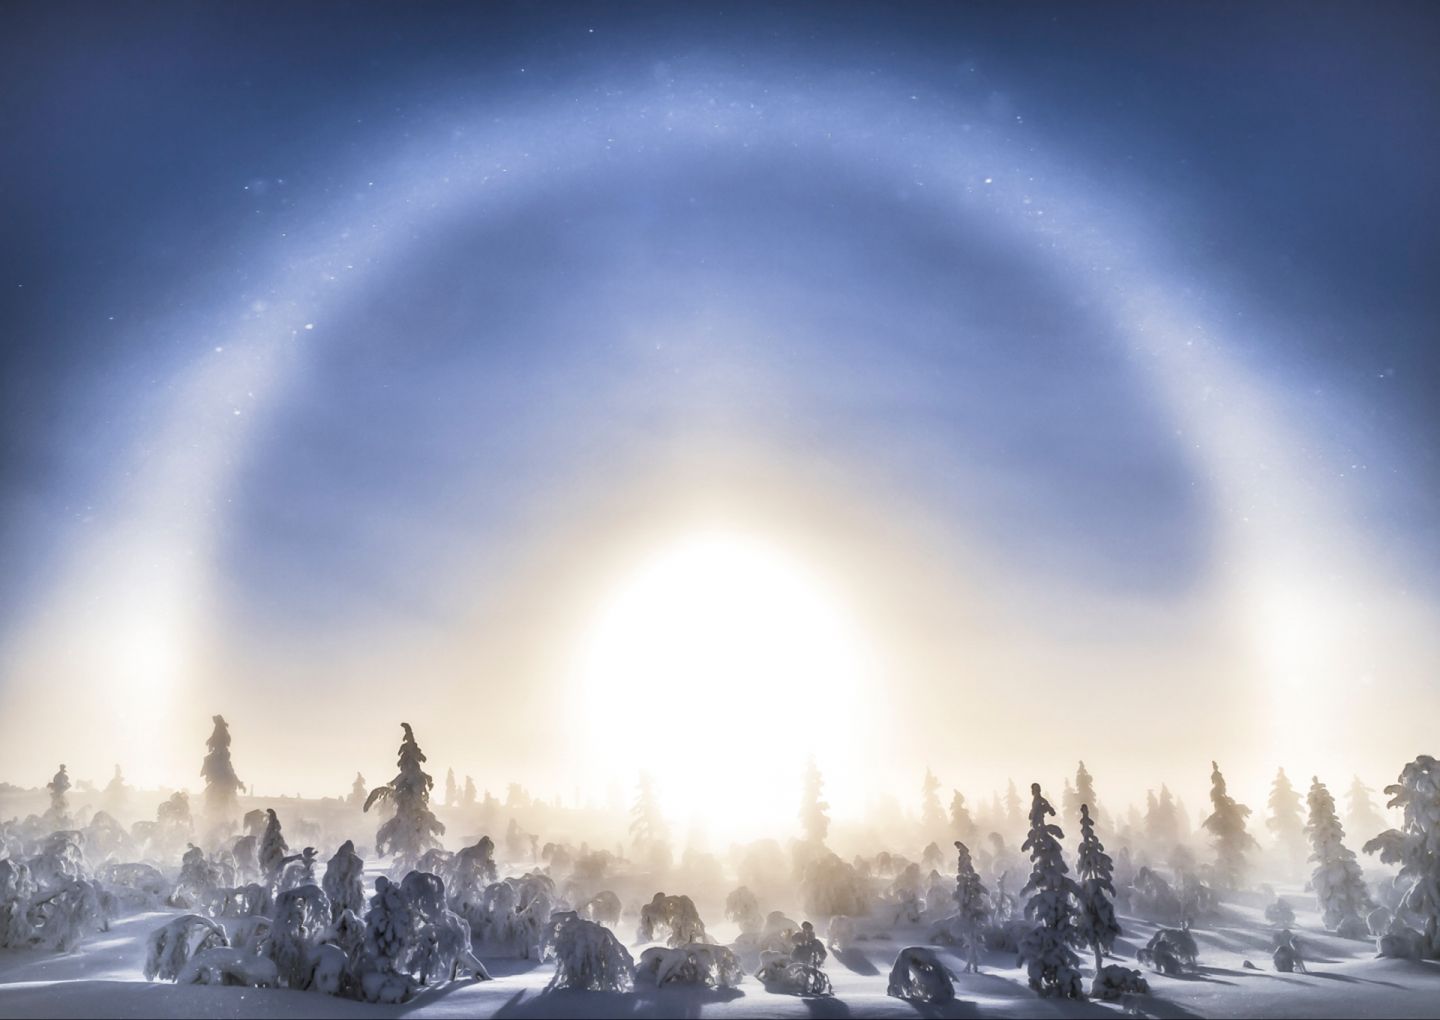 The frosty sun welcomes you to Finnish Lapland